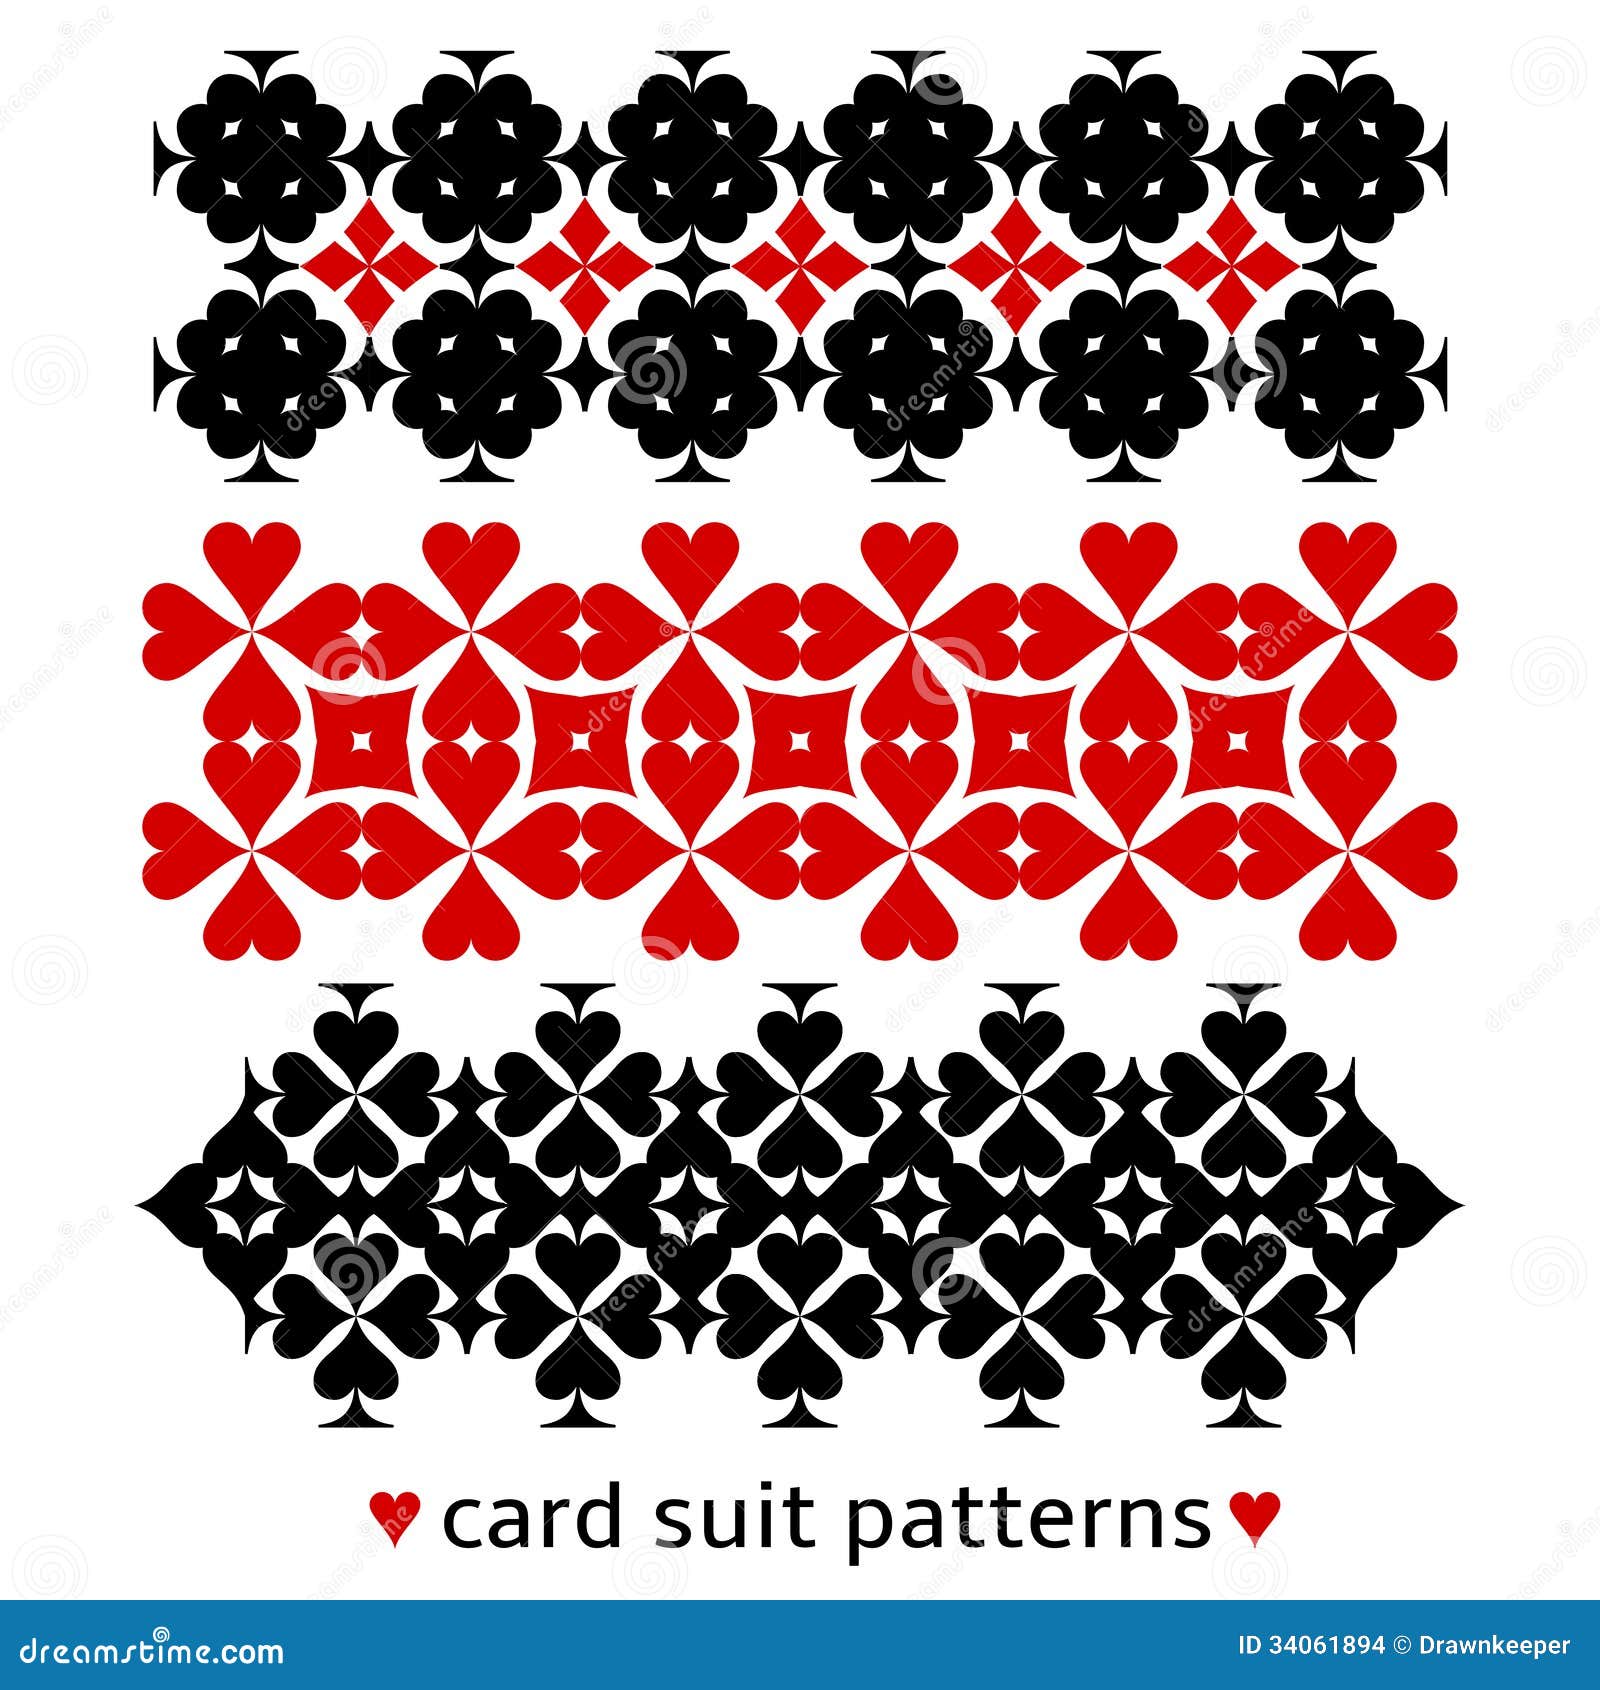 Patterns of Card Suits Black & Red Set of 4 Placemats and Coasters 